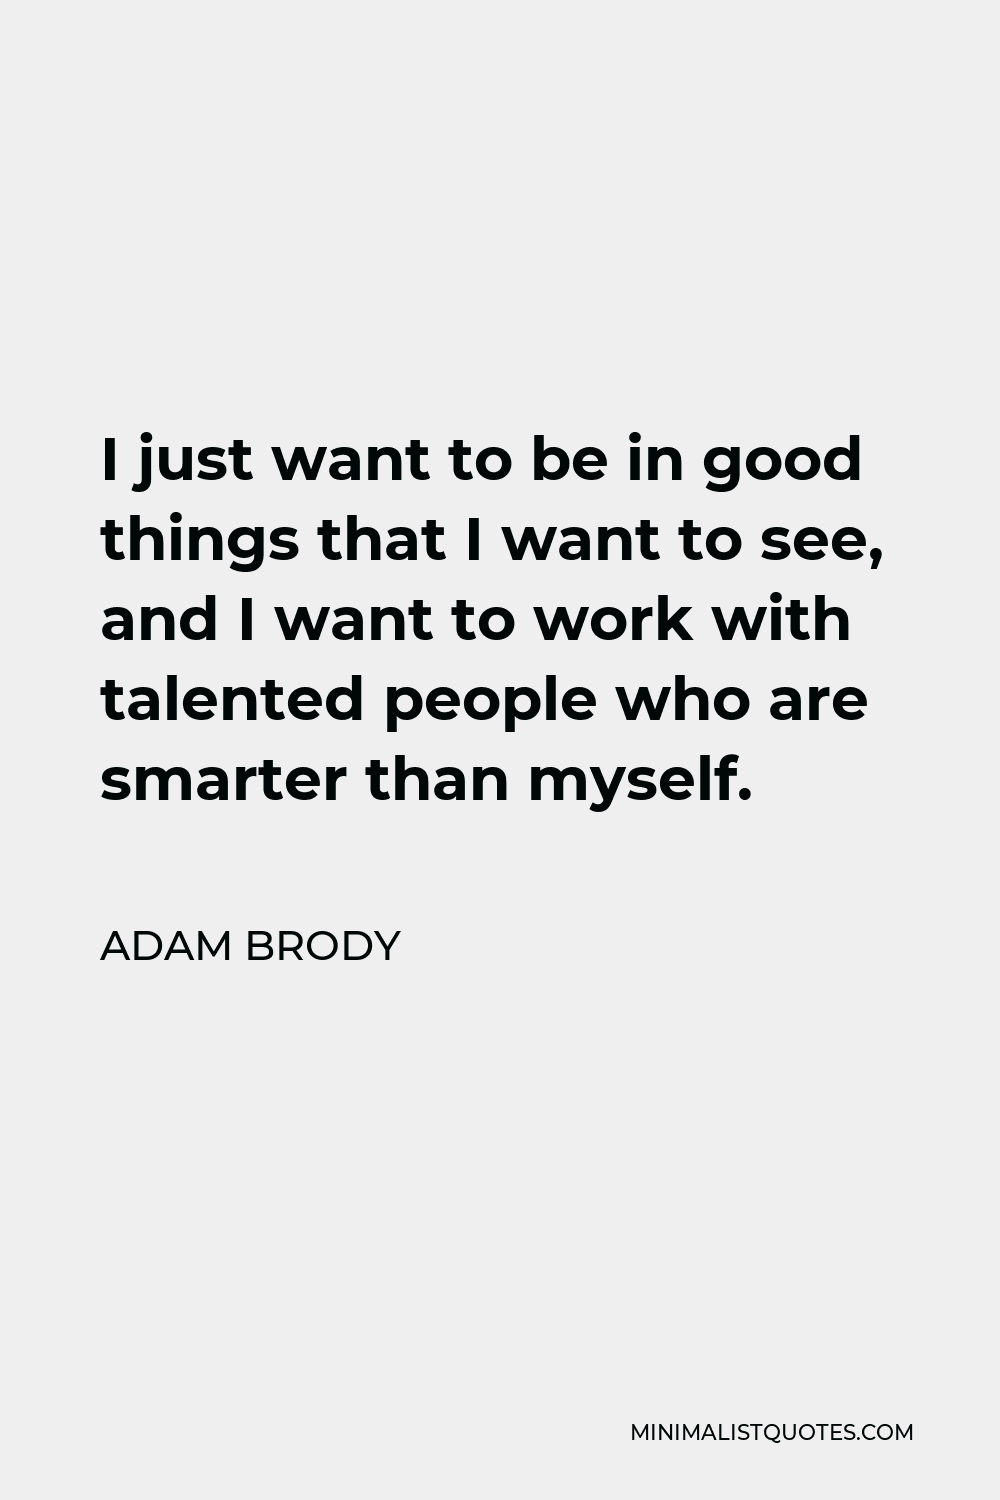 Adam Brody Quote - I just want to be in good things that I want to see, and I want to work with talented people who are smarter than myself.